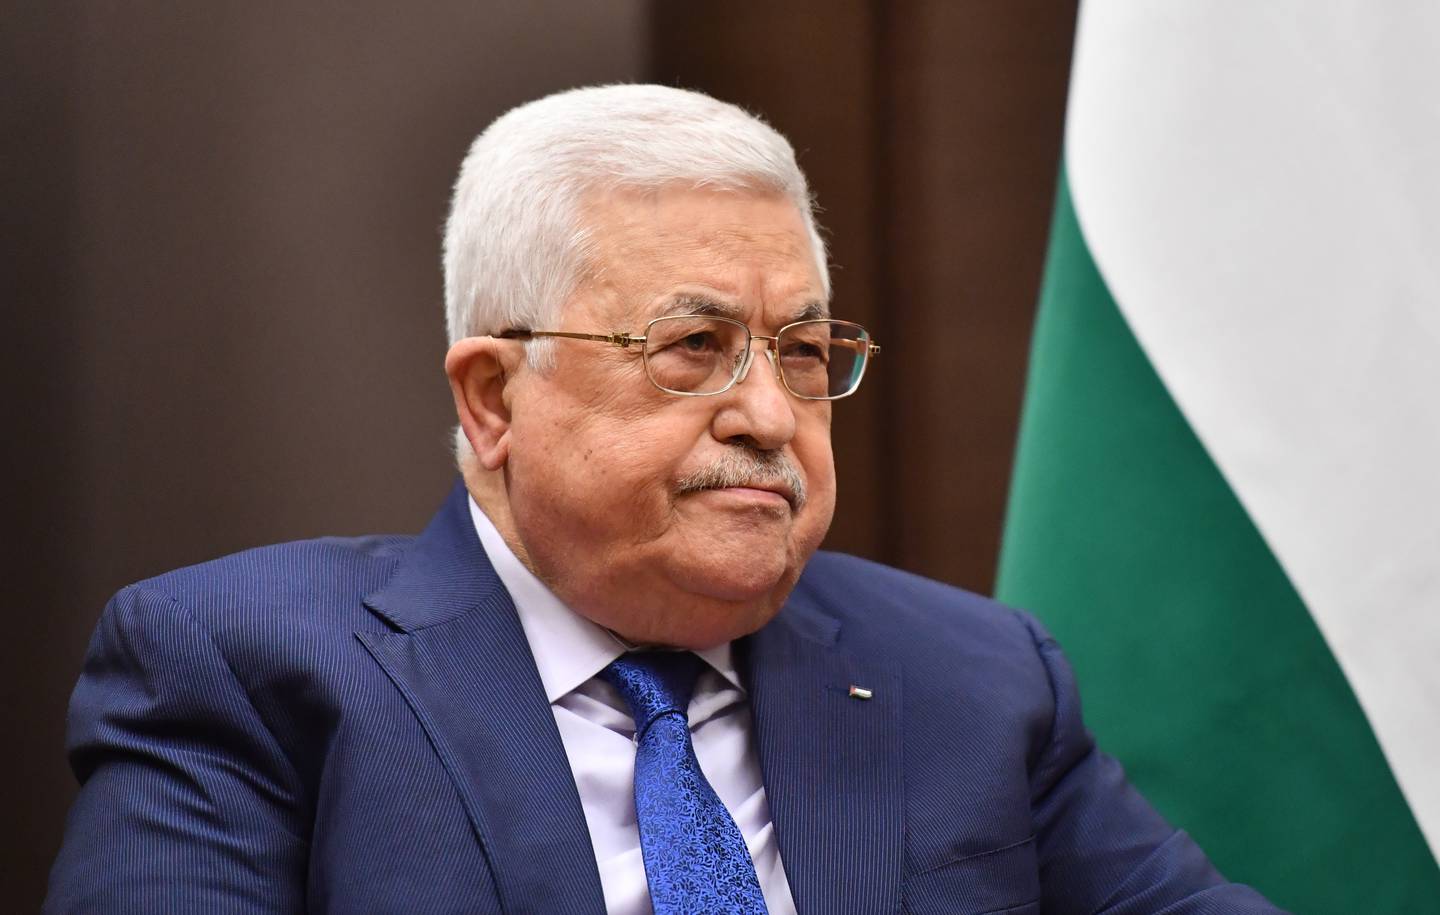 Palestinian President Mahmoud Abbas rejected last year a plan championed by former US president Donald Trump as it included the  recognition of Jerusalem as the capital of Israel. EPA